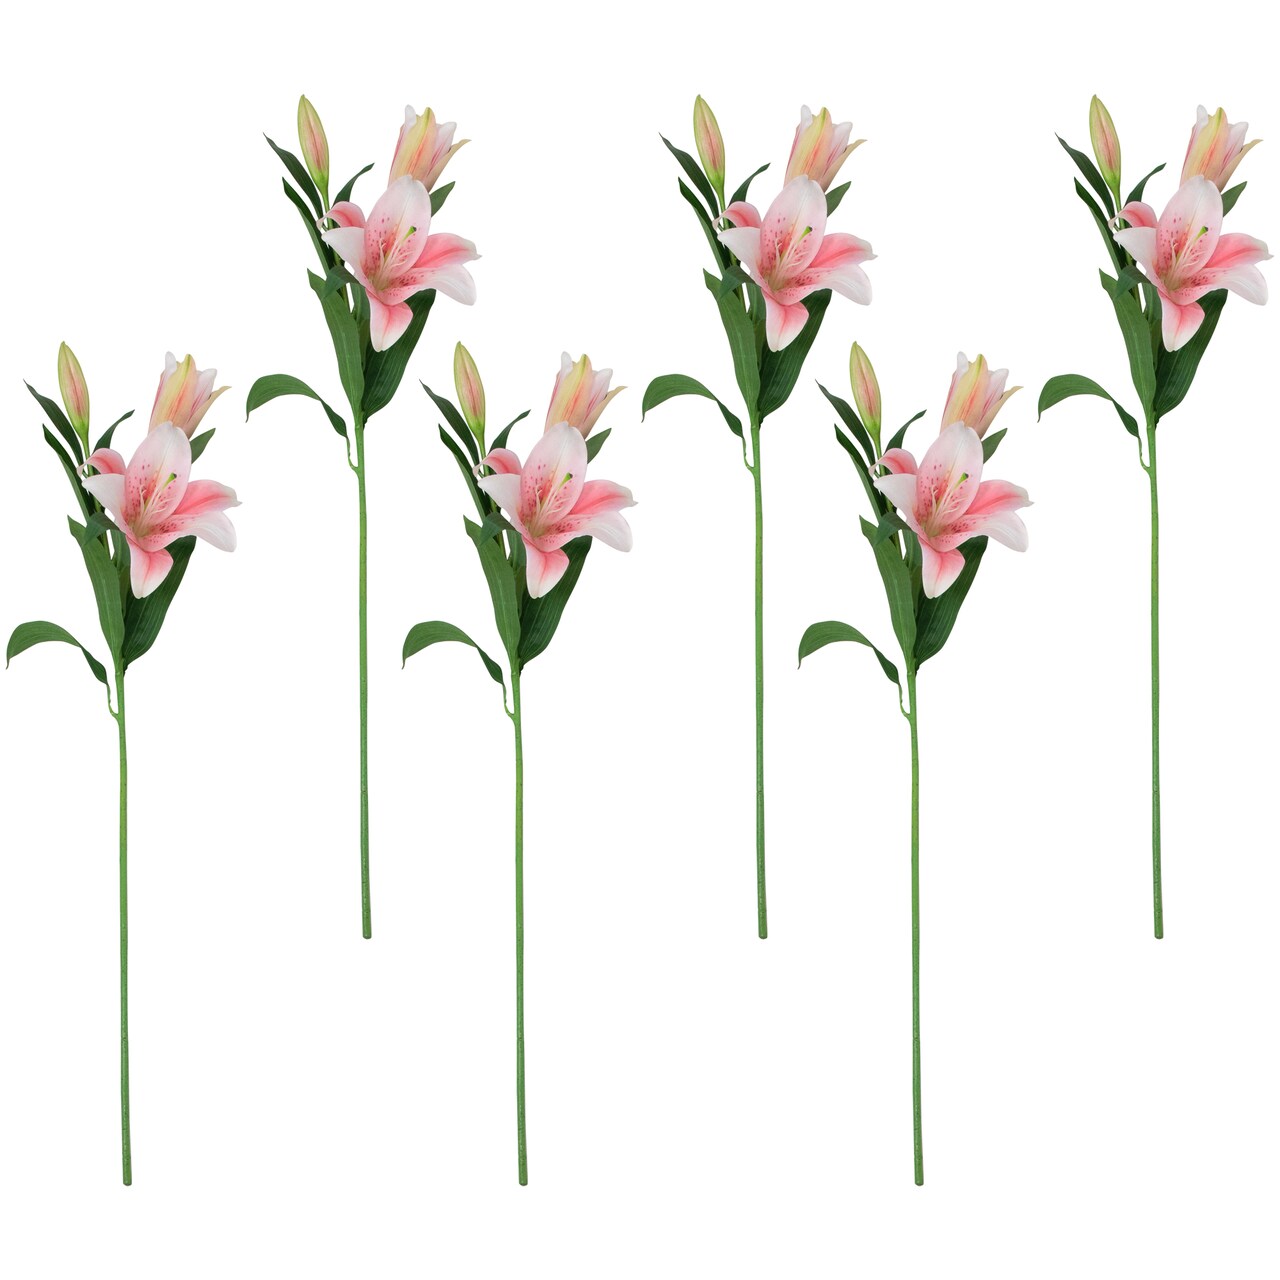 Northlight Real Touch™ Pink Artificial Lily Floral Stems, Set of 6 - 38